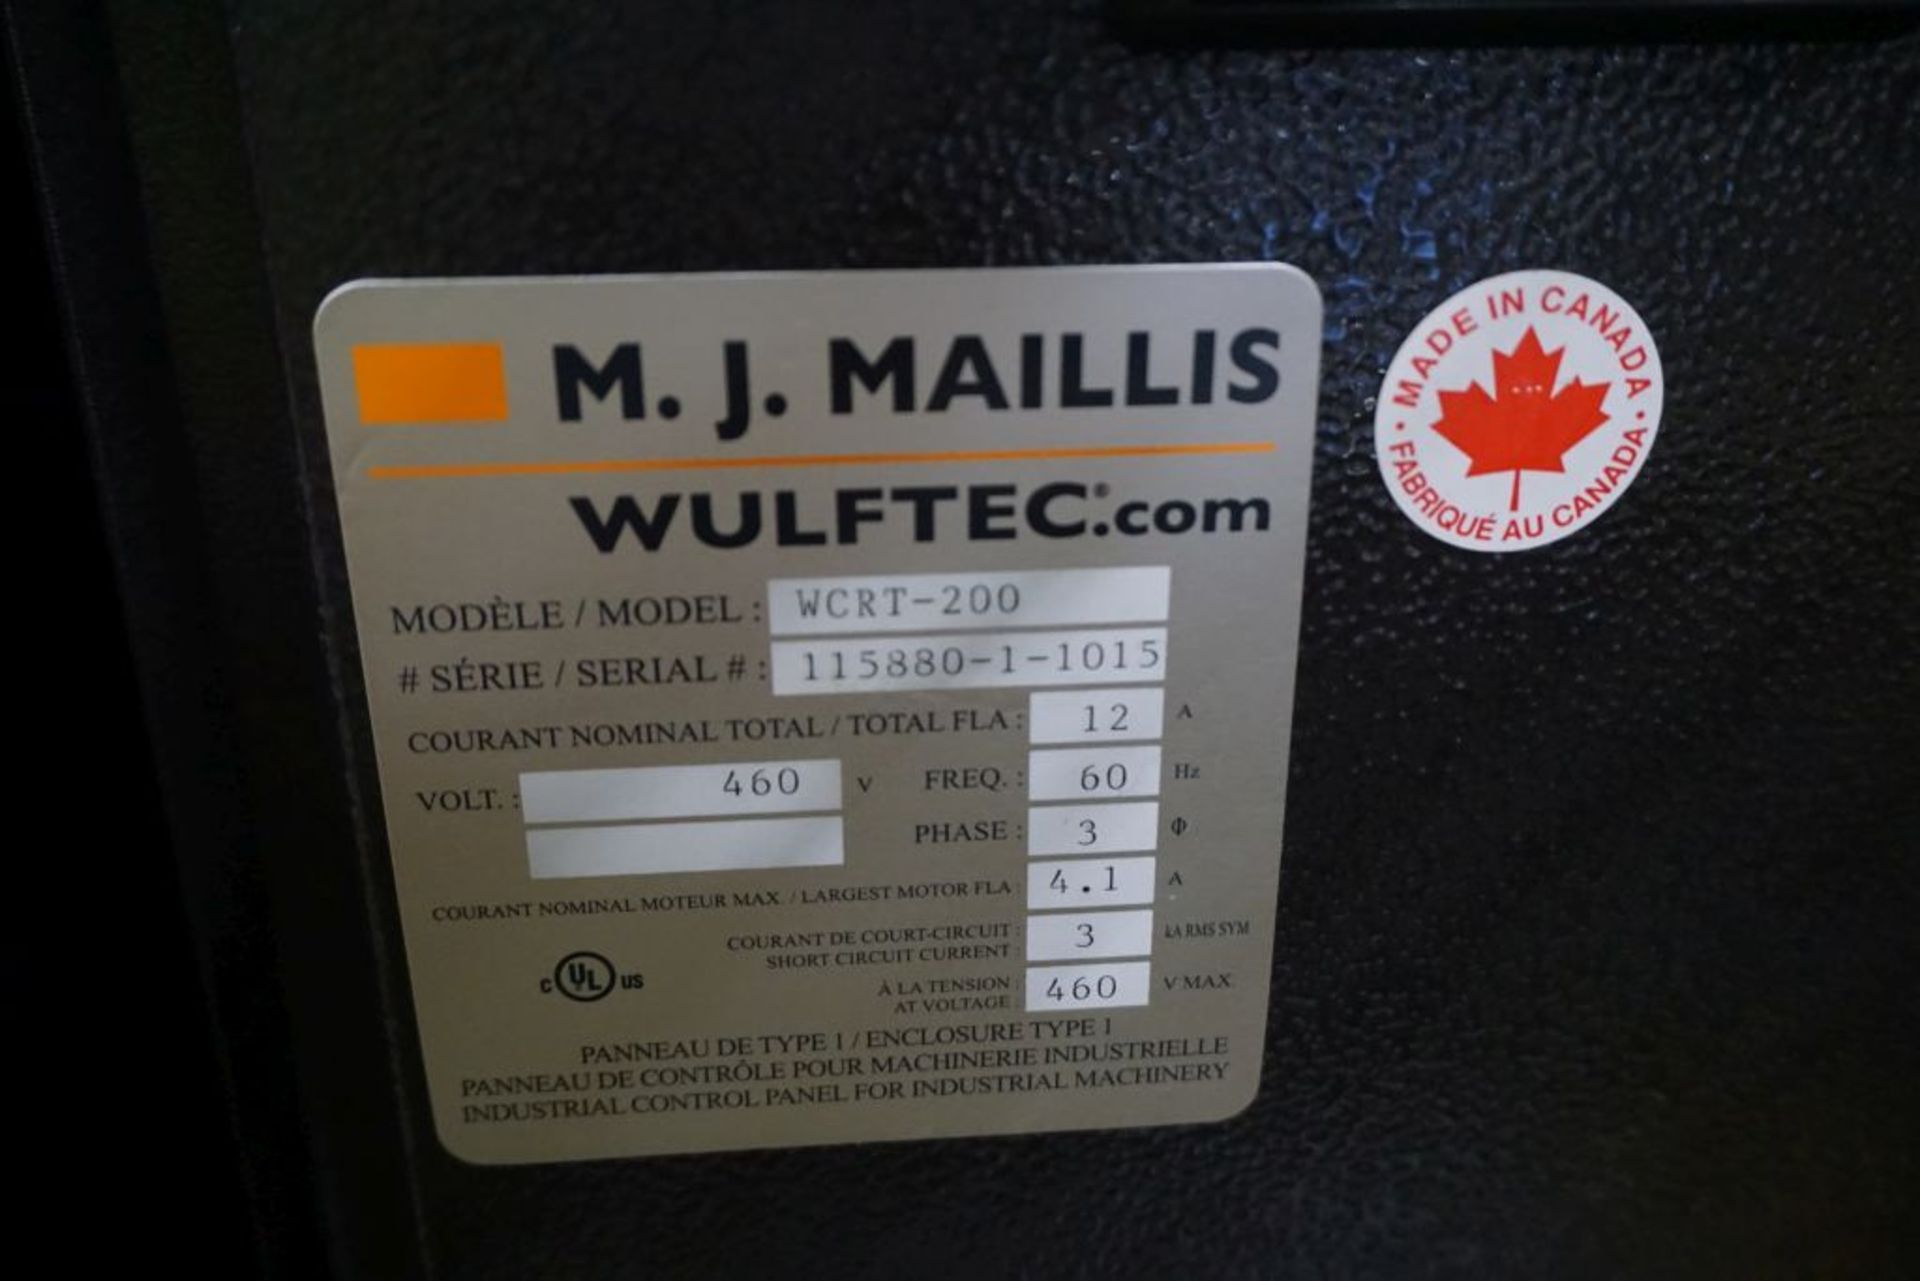 MJ Maillis/Wulftec Autowrapper - Model No. WCRT-200; Serial No. 115880-1-1015; 460V; Includes:; - Image 15 of 53